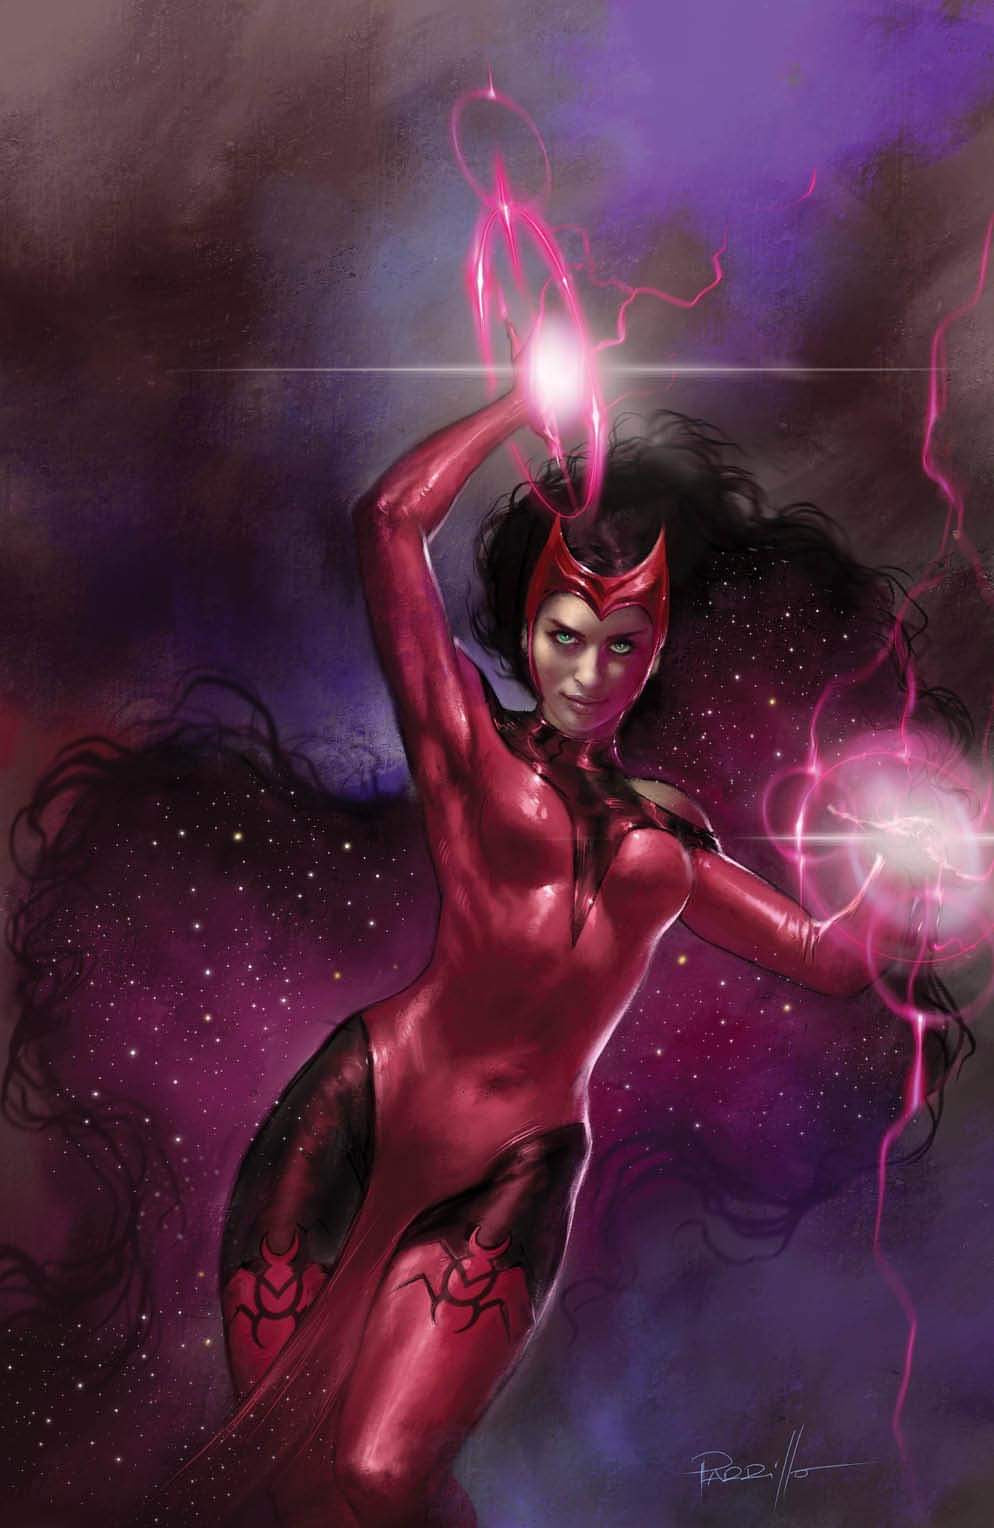 SCARLET WITCH #1 - EXCLUSIVE - PARRILLO